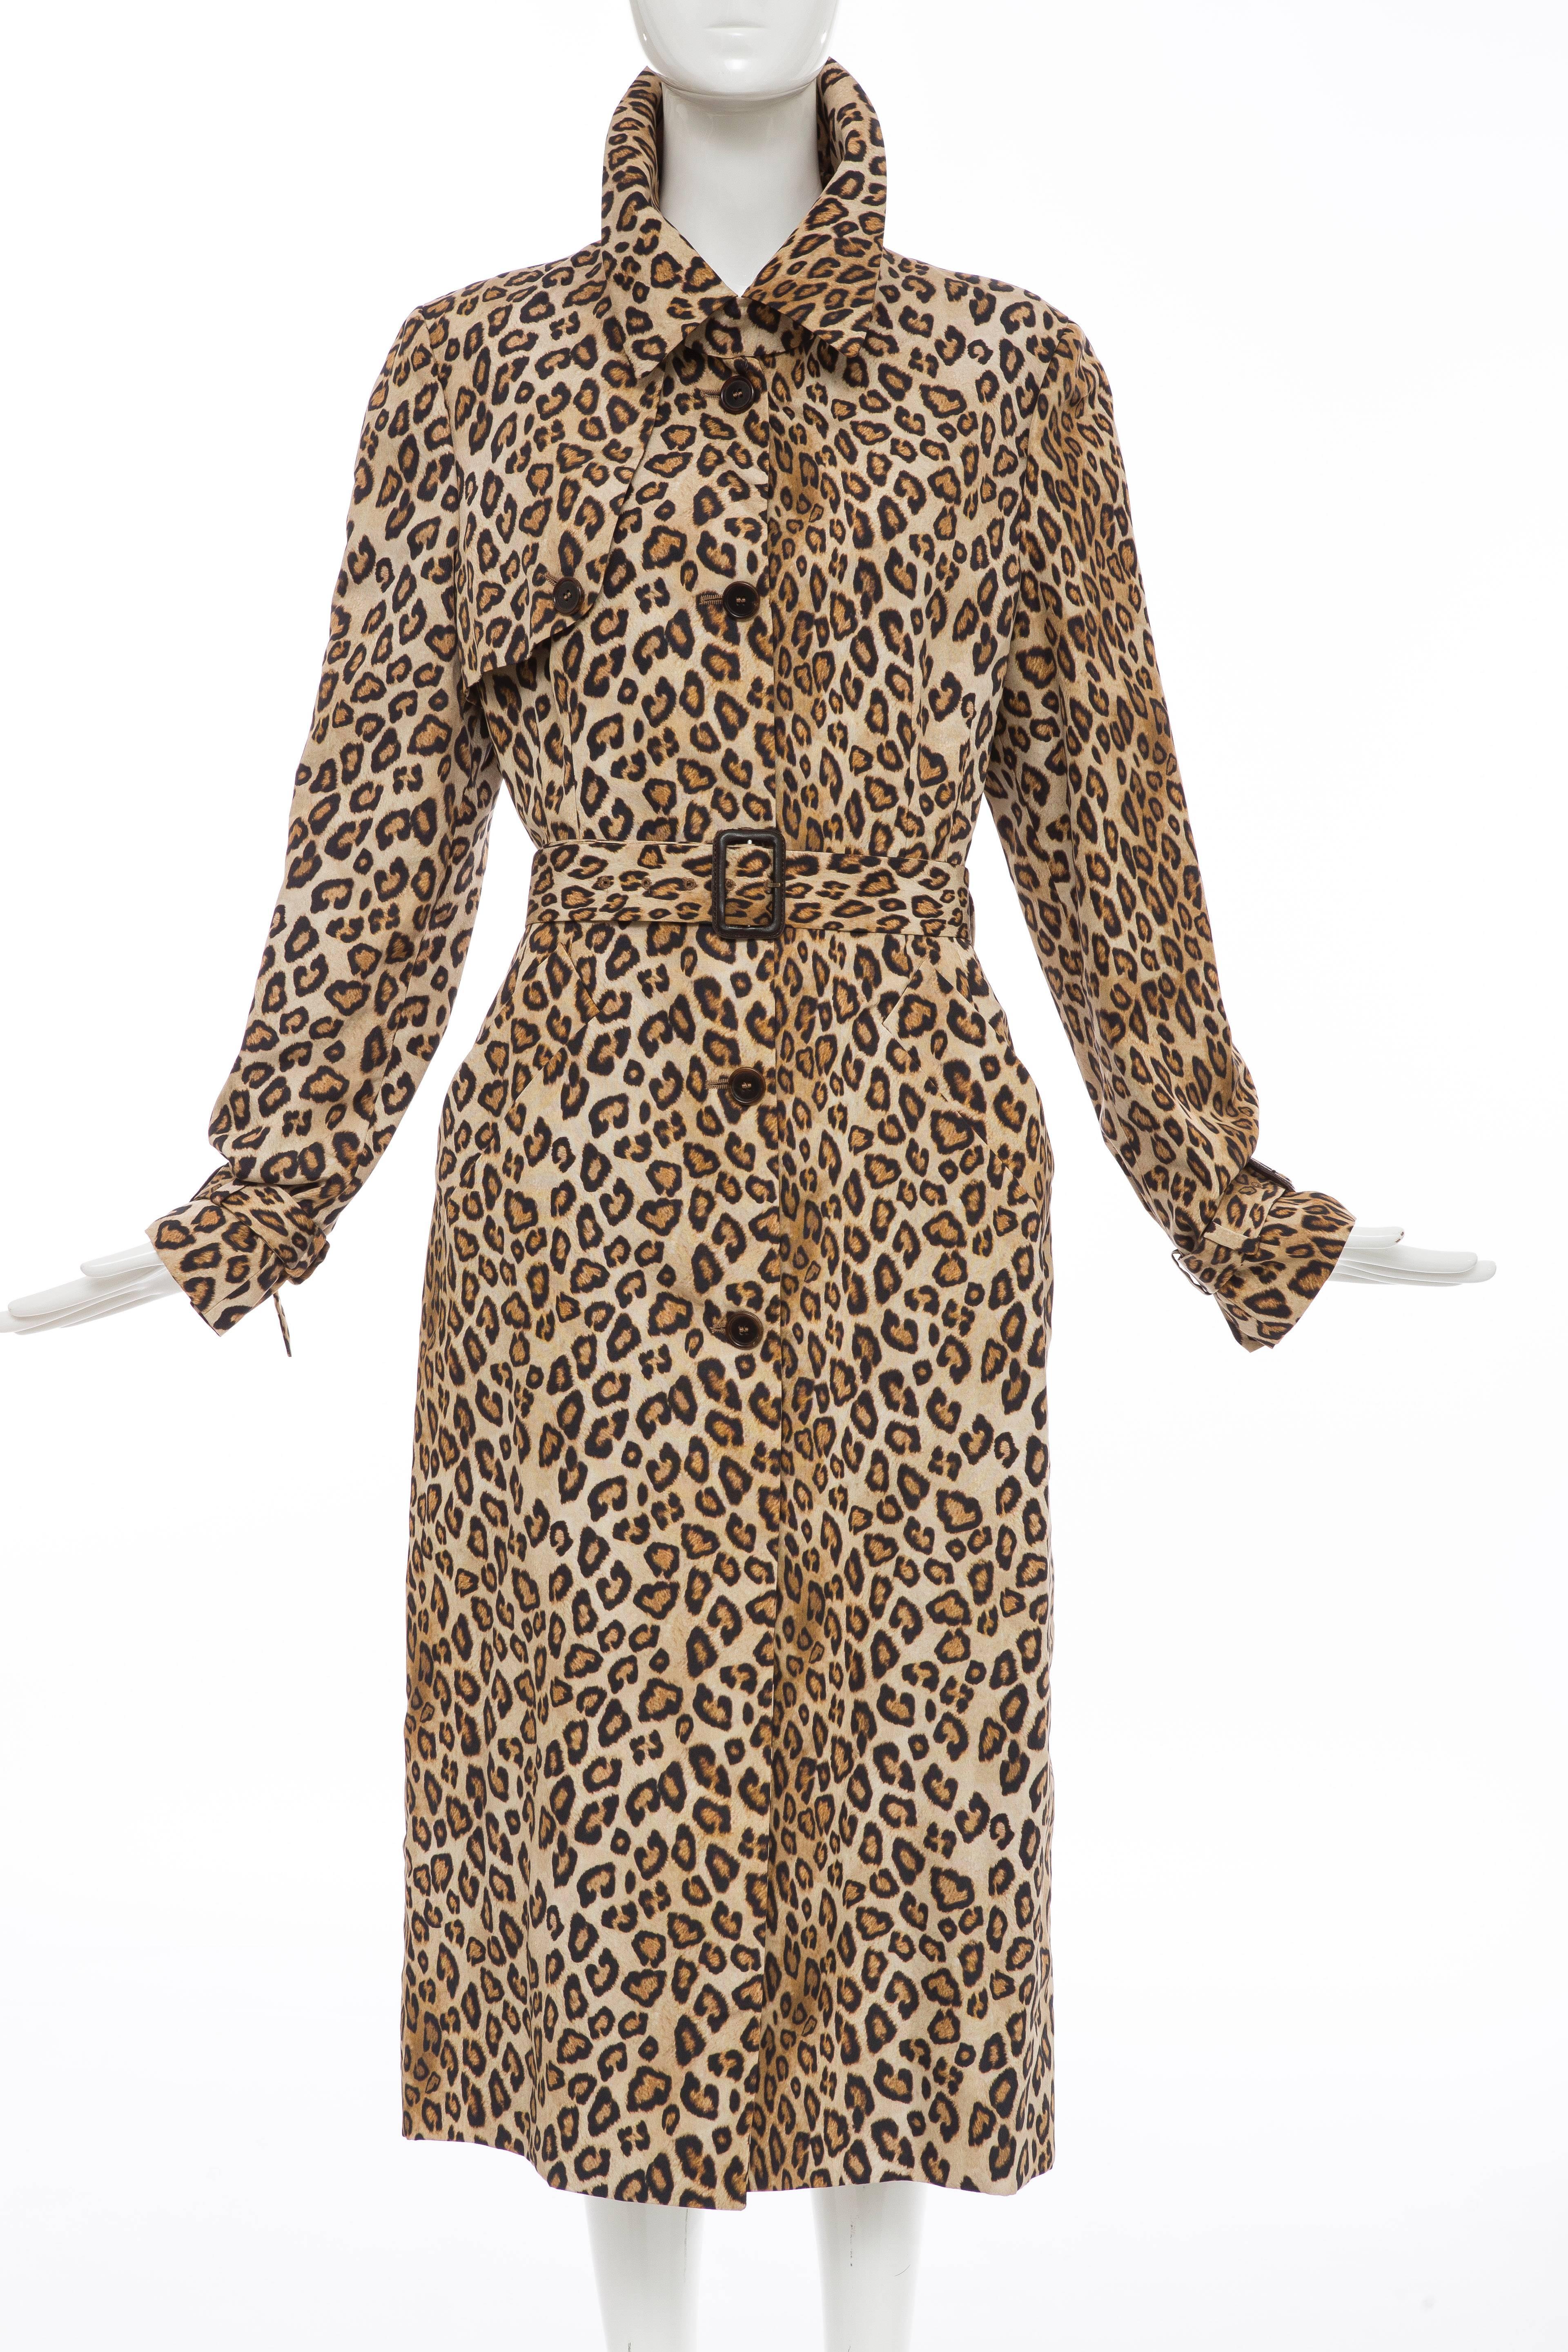 Alexander McQueen, Autumn-Winter 2005 leopard print silk trench coat with removable belt, two front pockets, inverted pleat at back and front button closures.

EU. size 44
US. size 8